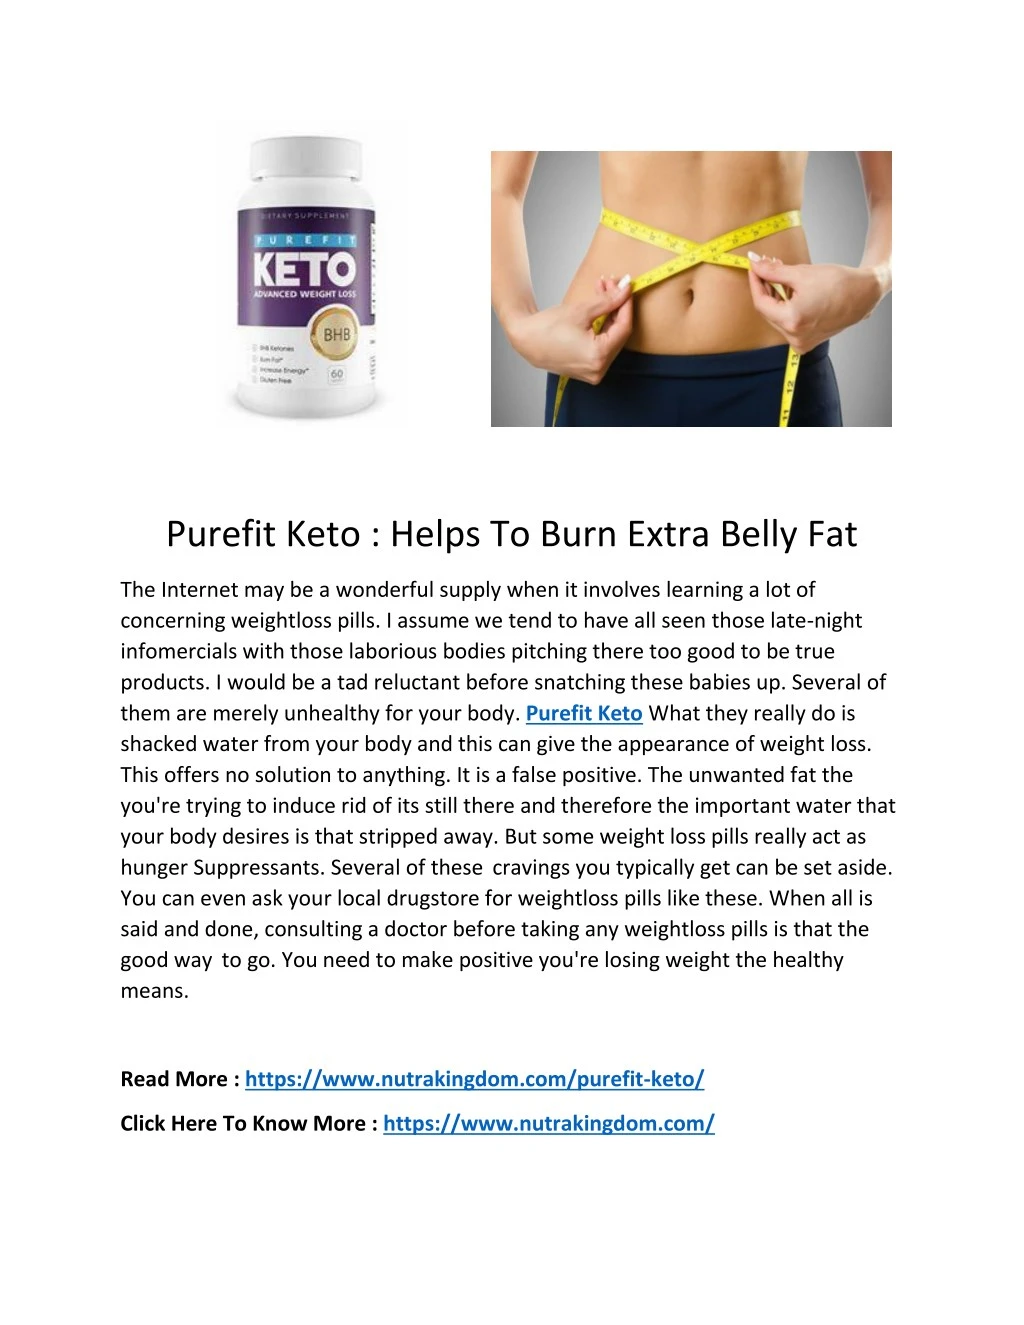 purefit keto helps to burn extra belly fat